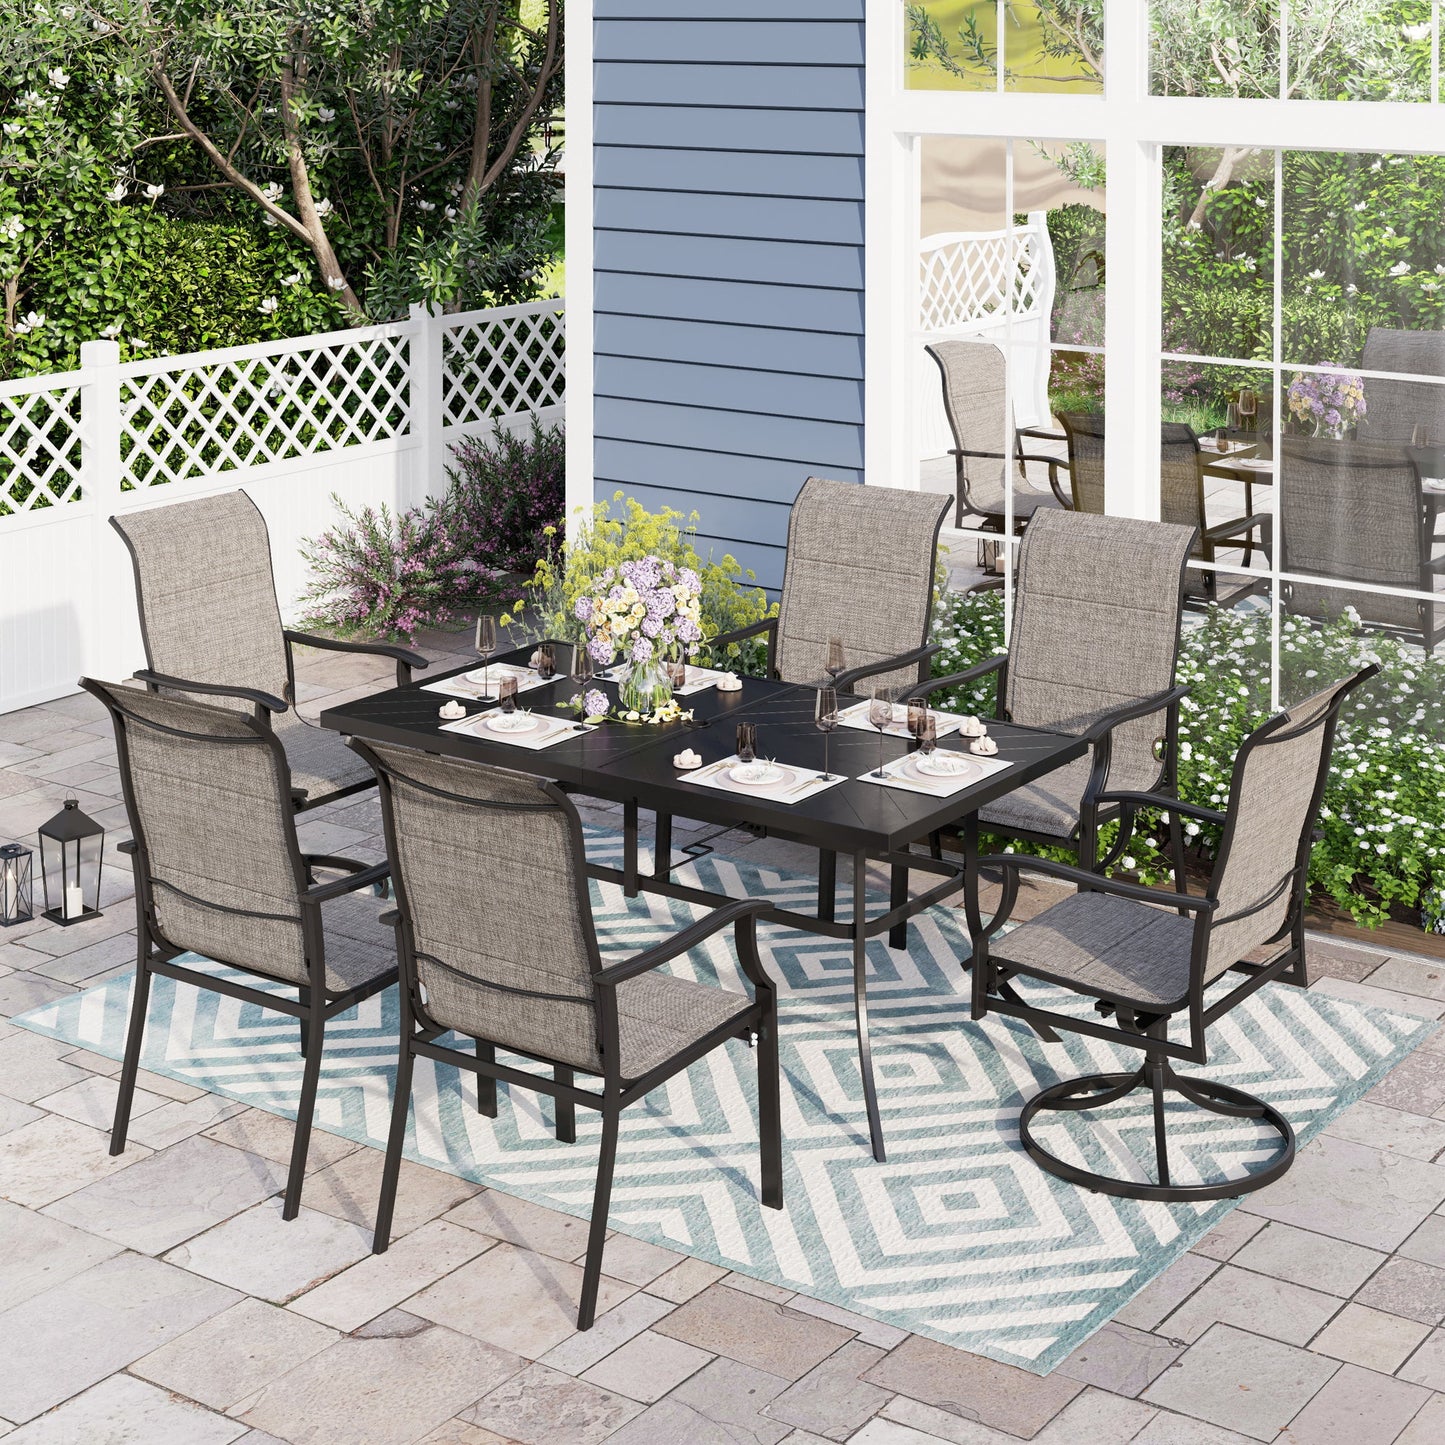 Sophia & William 7 Piece Patio Outdoor Dining Set Metal Furniture Set with Padded Swivel Chairs and Table